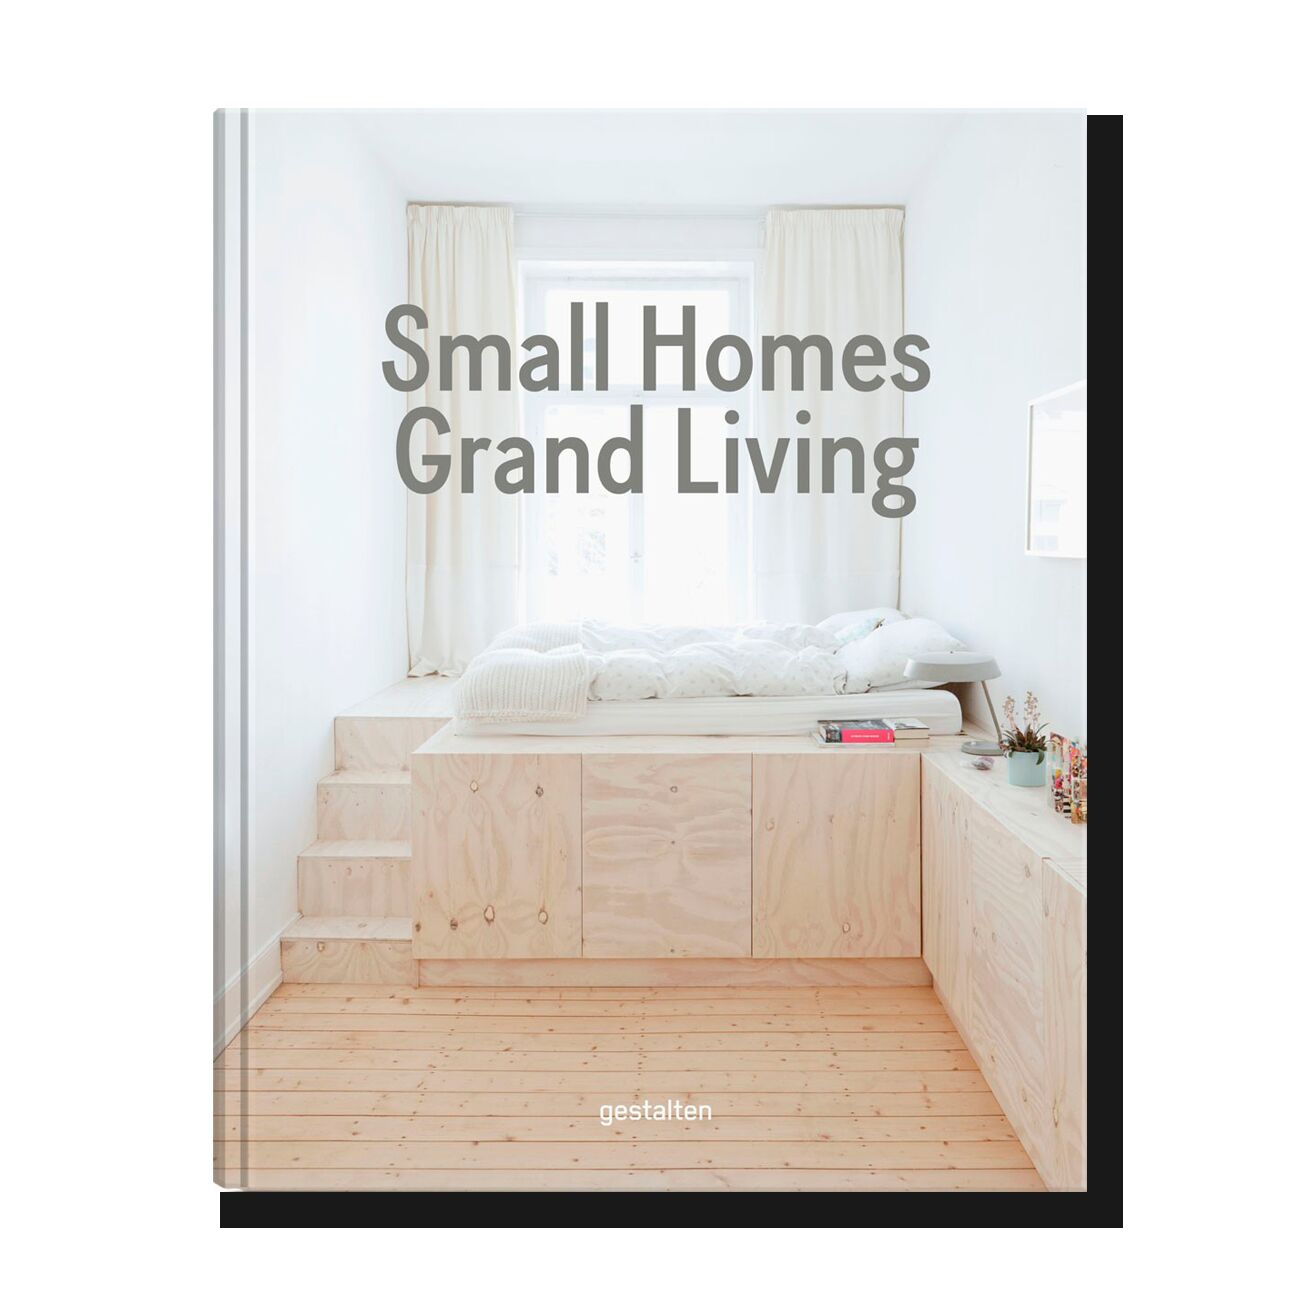 Small Homes, Grand Living: Interior Design for Compact Spaces